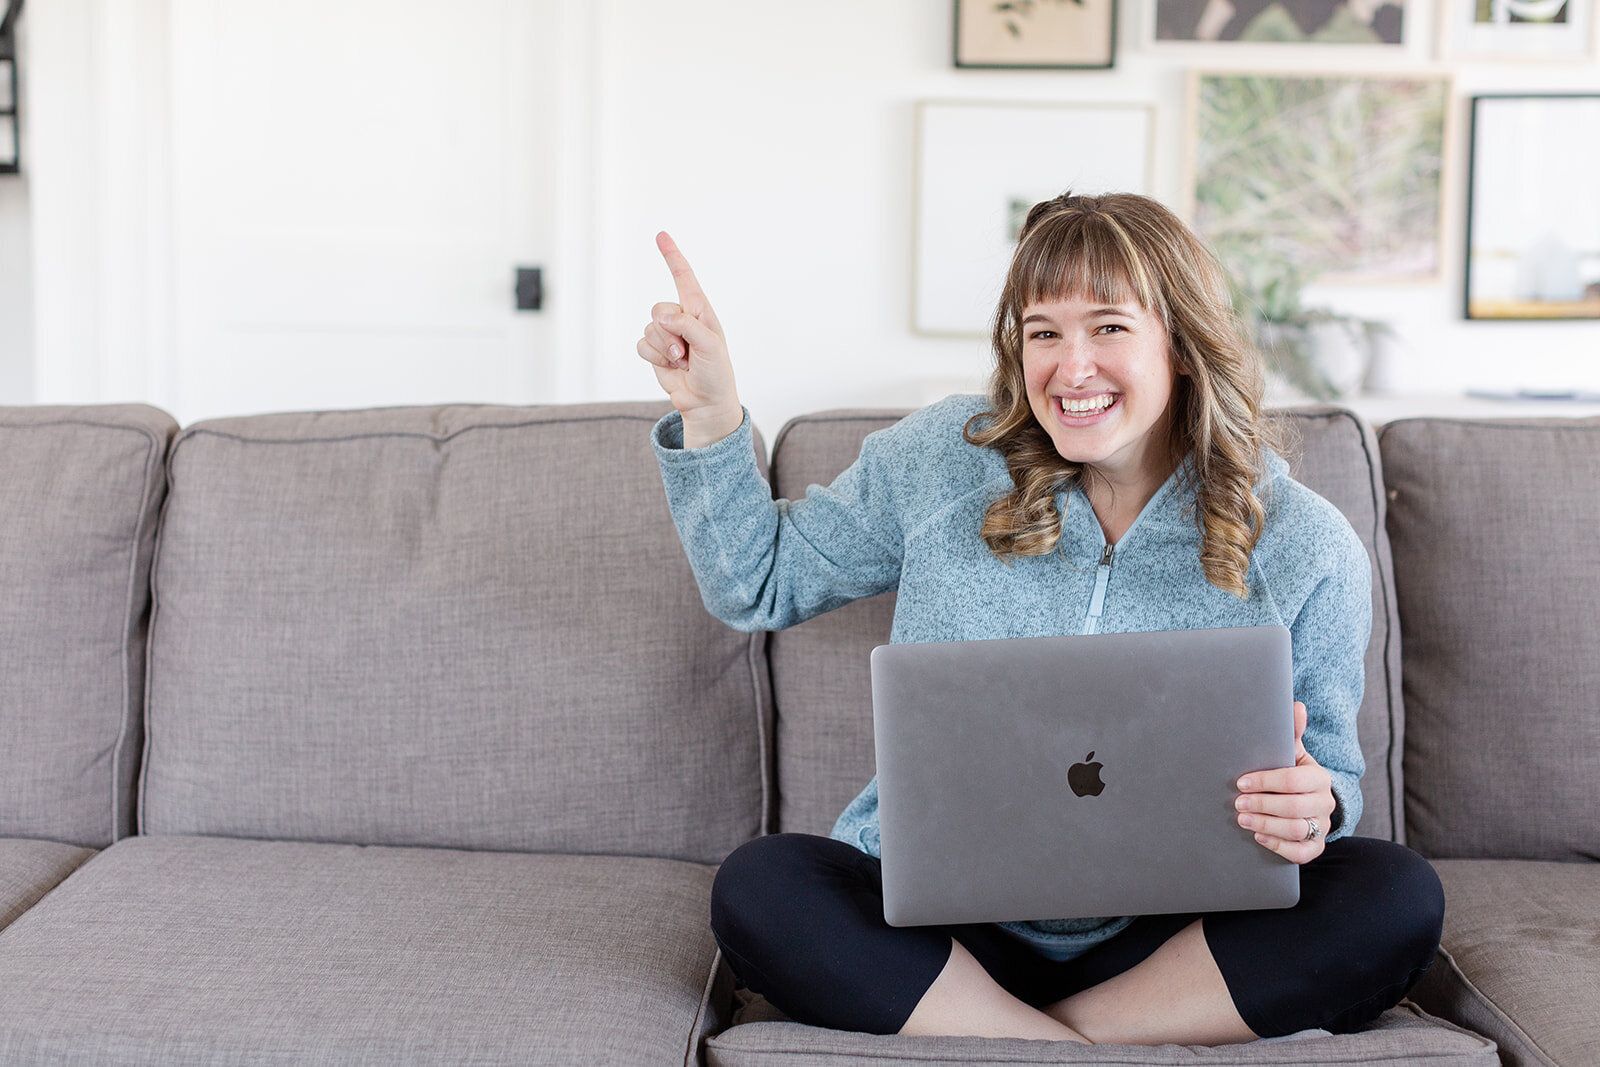 Heather smiling at camera and holding laptop while sitting on couch and pointing her right pointer finger up towards the sky.